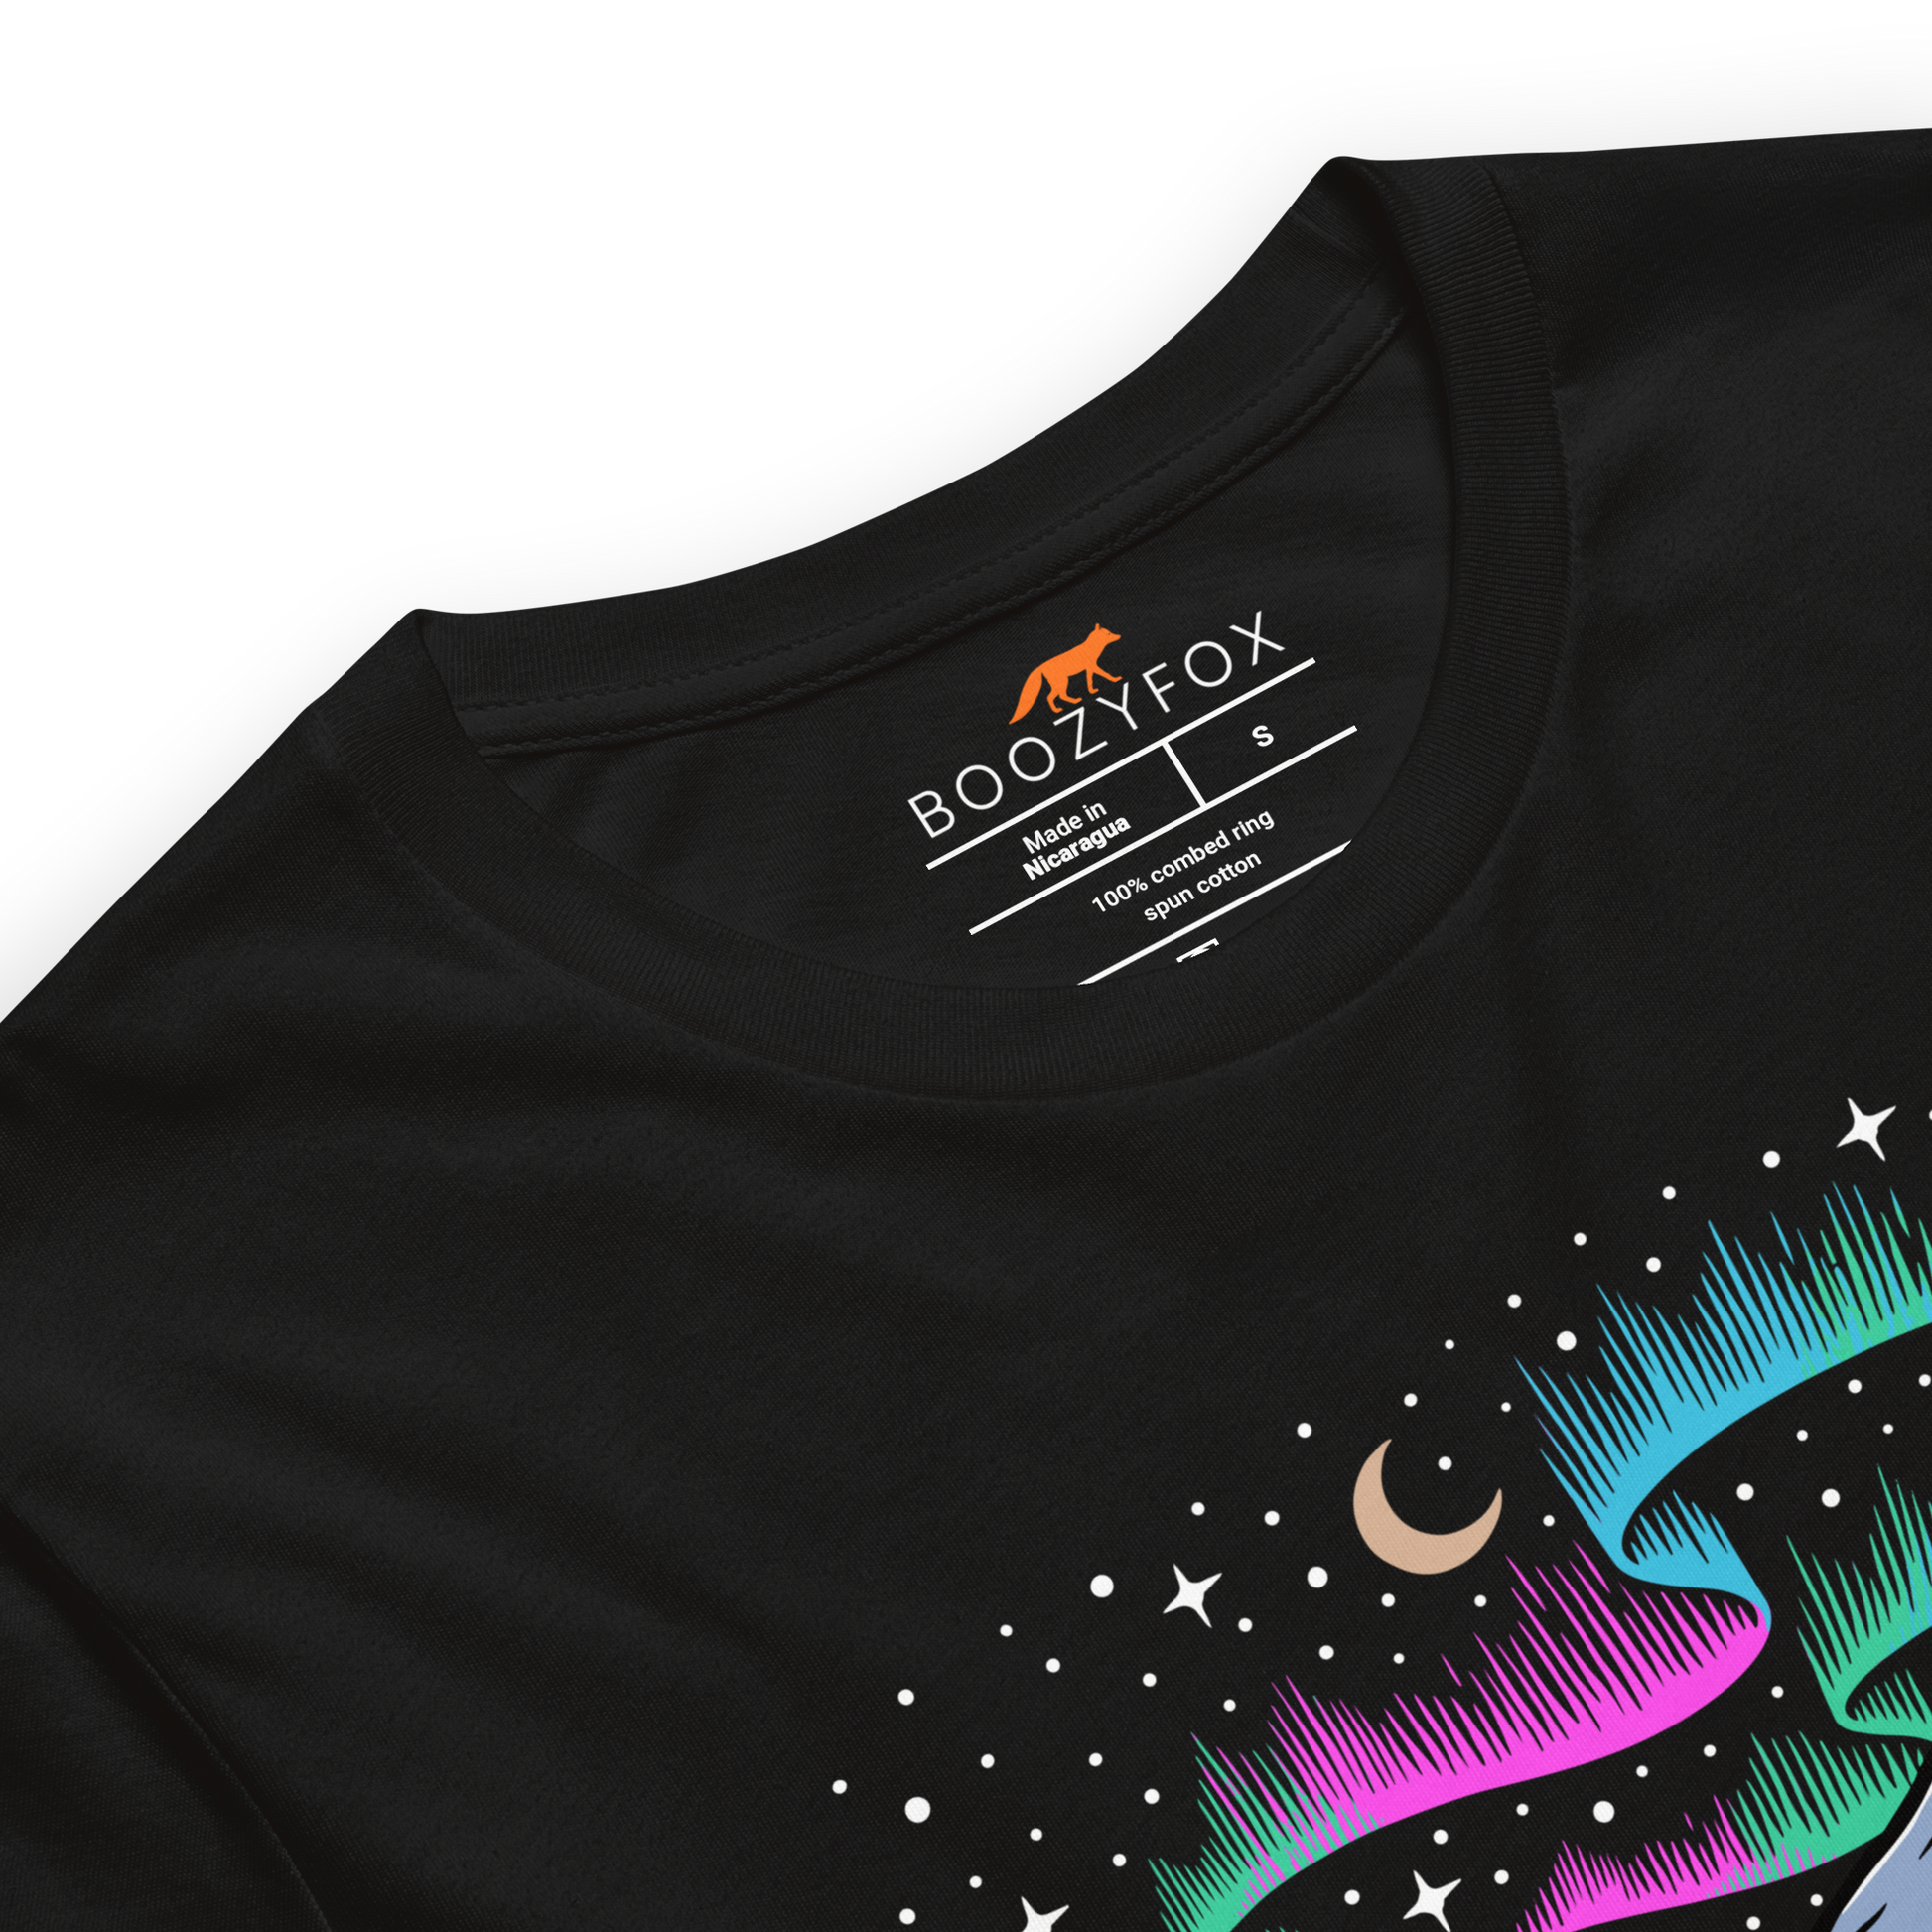 Product details of a Black Premium Let's Get Lost Tee featuring a mesmerizing night sky, adorned with stars and aurora borealis graphic on the chest - Cool Graphic Northern Lights Tees - Boozy Fox